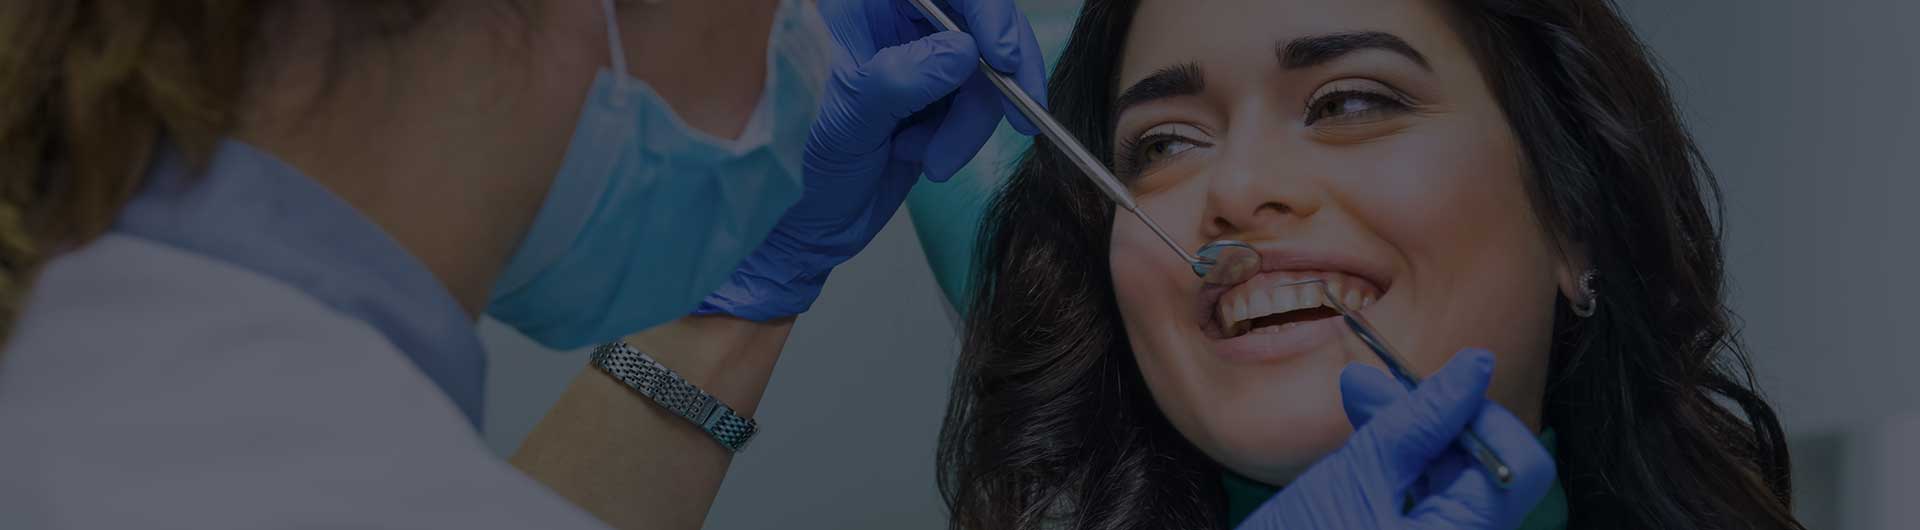 Person smiling during a dental examination.